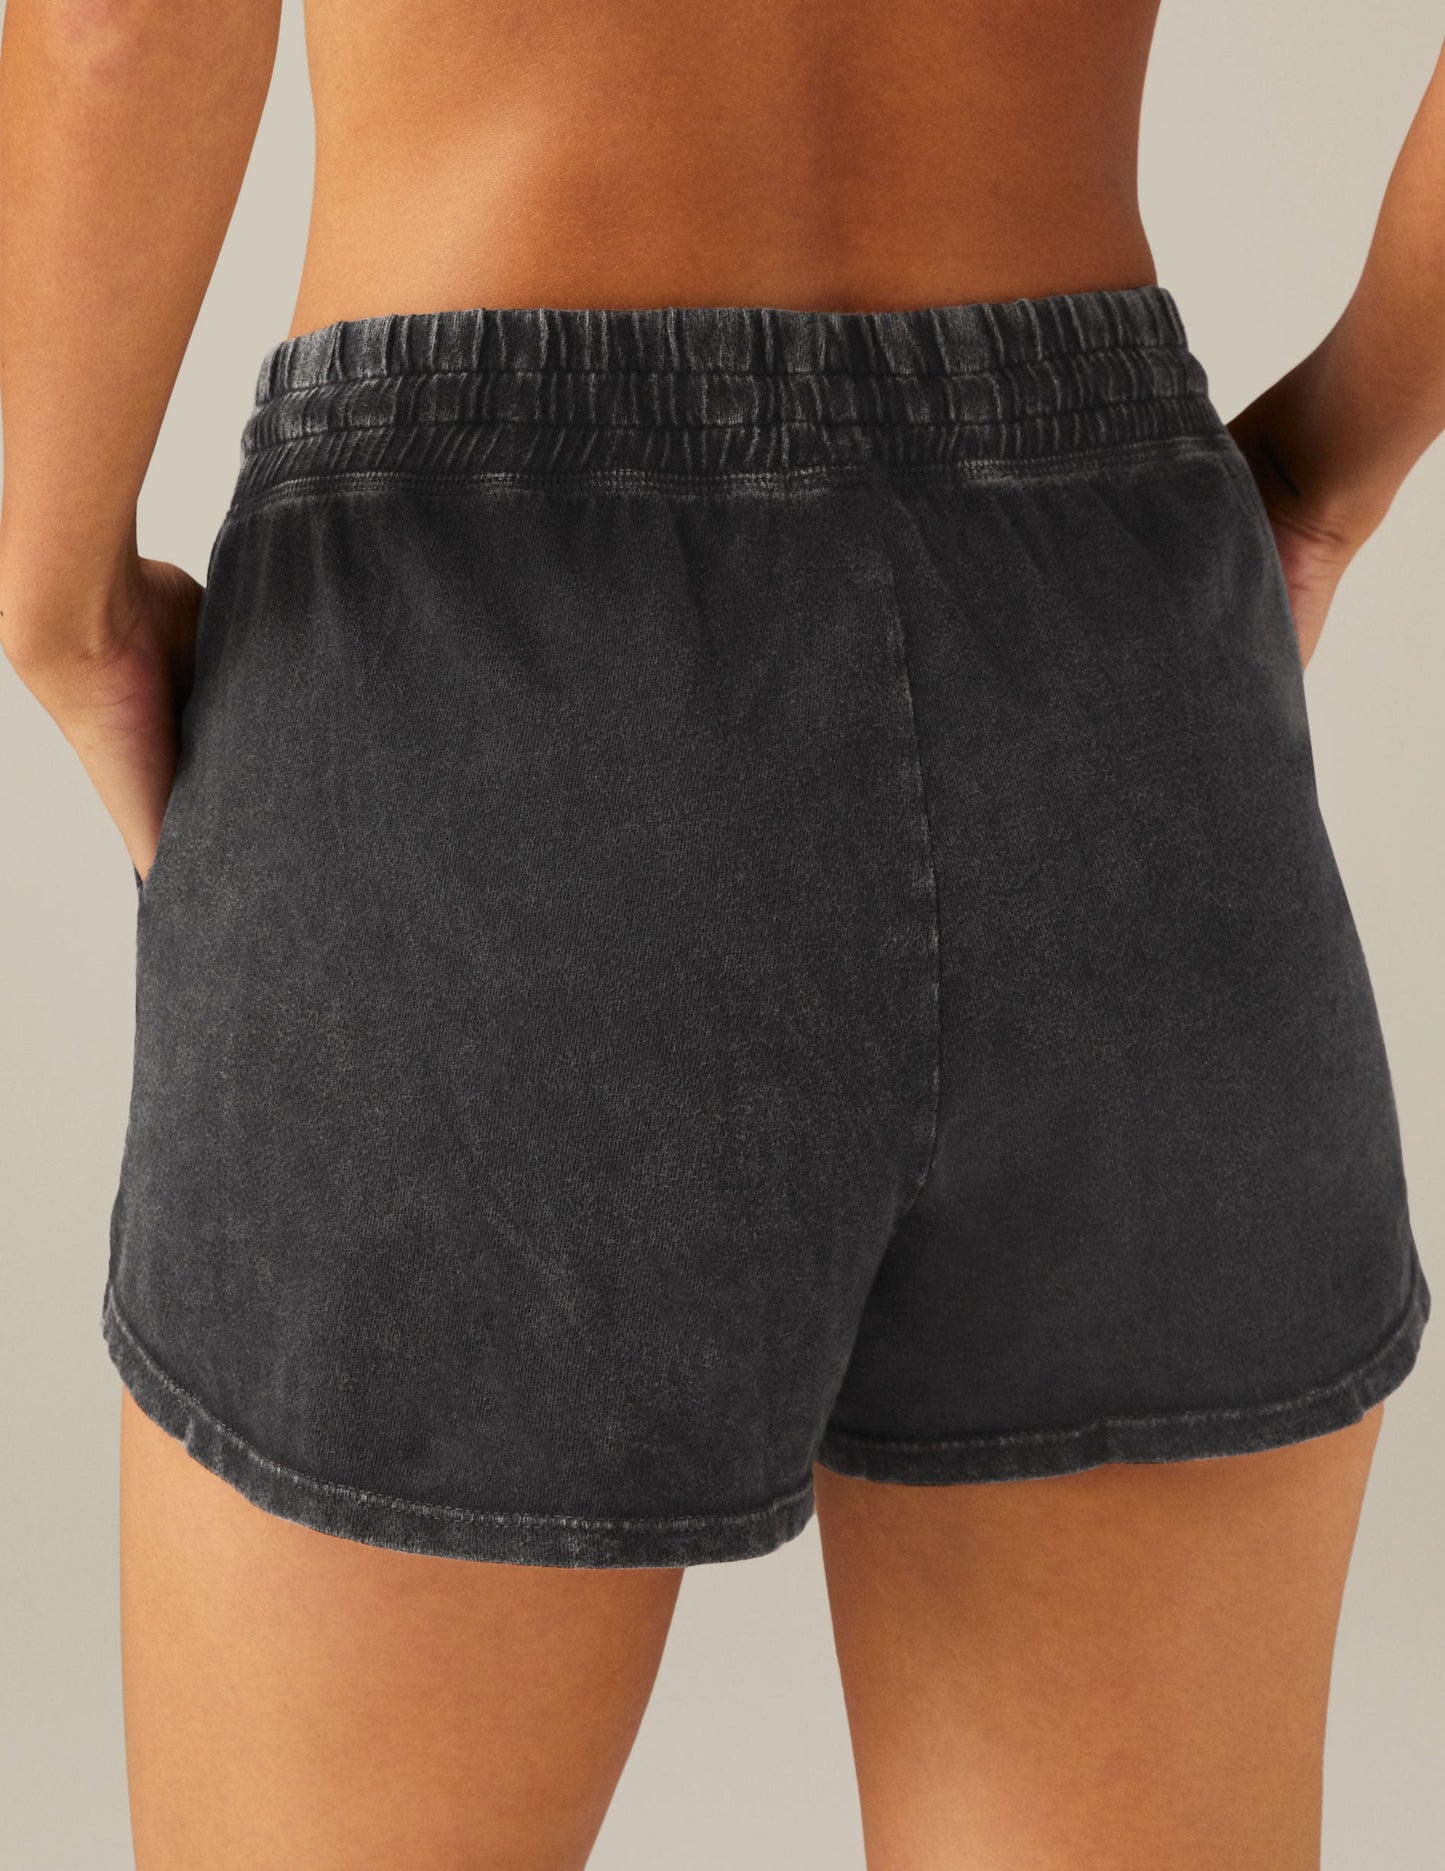 BEYOND YOGA BEACH DAY COMFORT SHORT WASHED BLACK NEW!